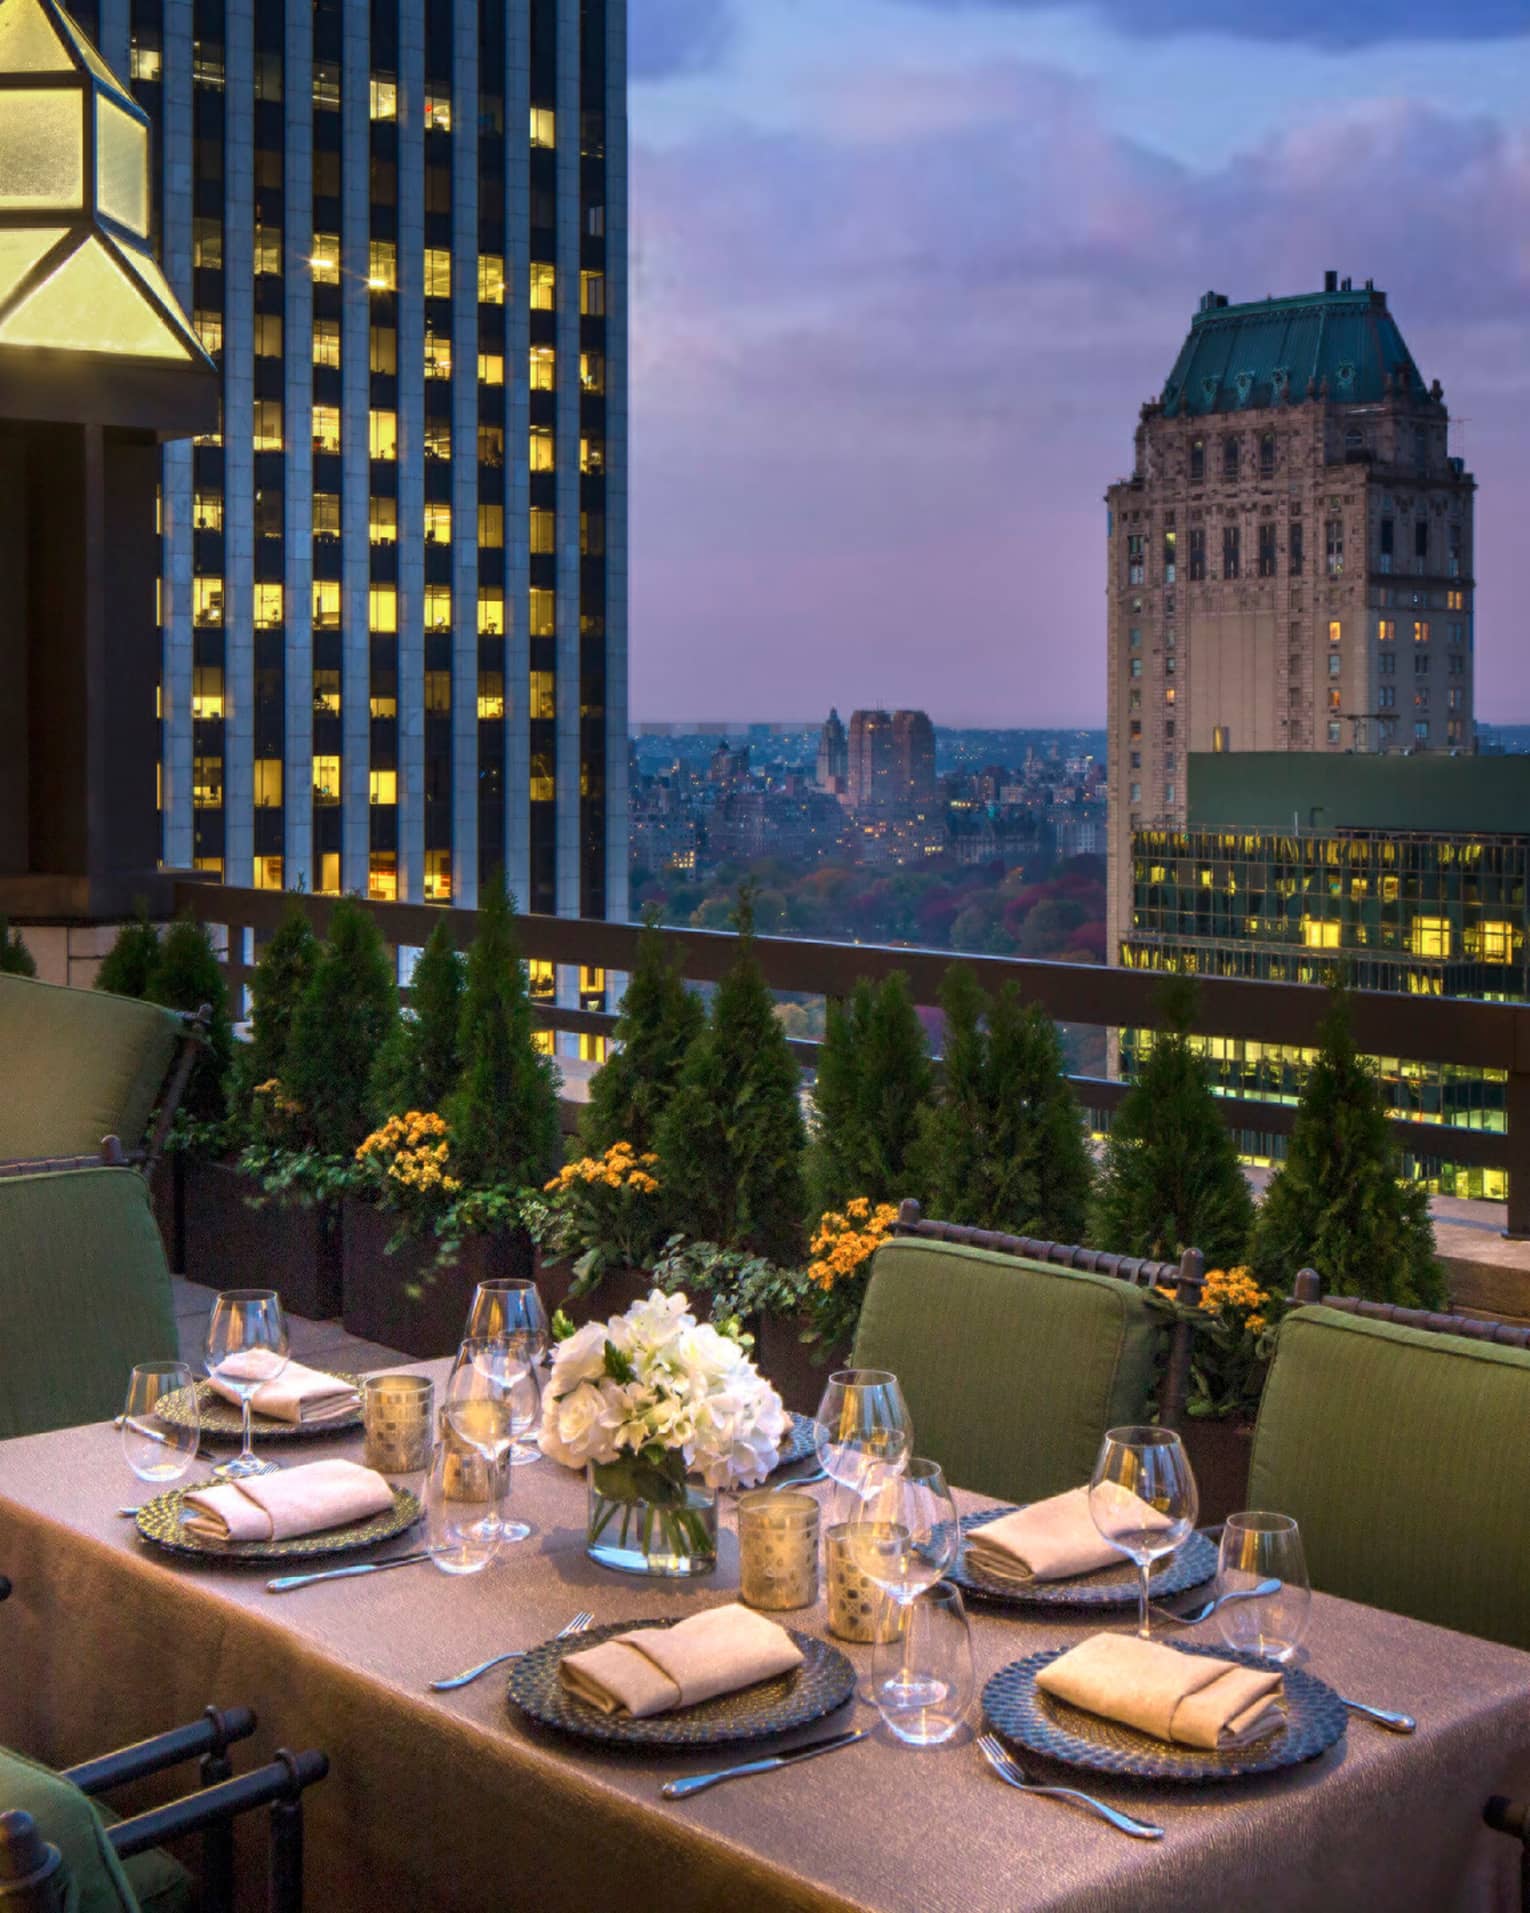 Private patio dining table with plush green cushions on chairs on rooftop terrace, city views at dusk